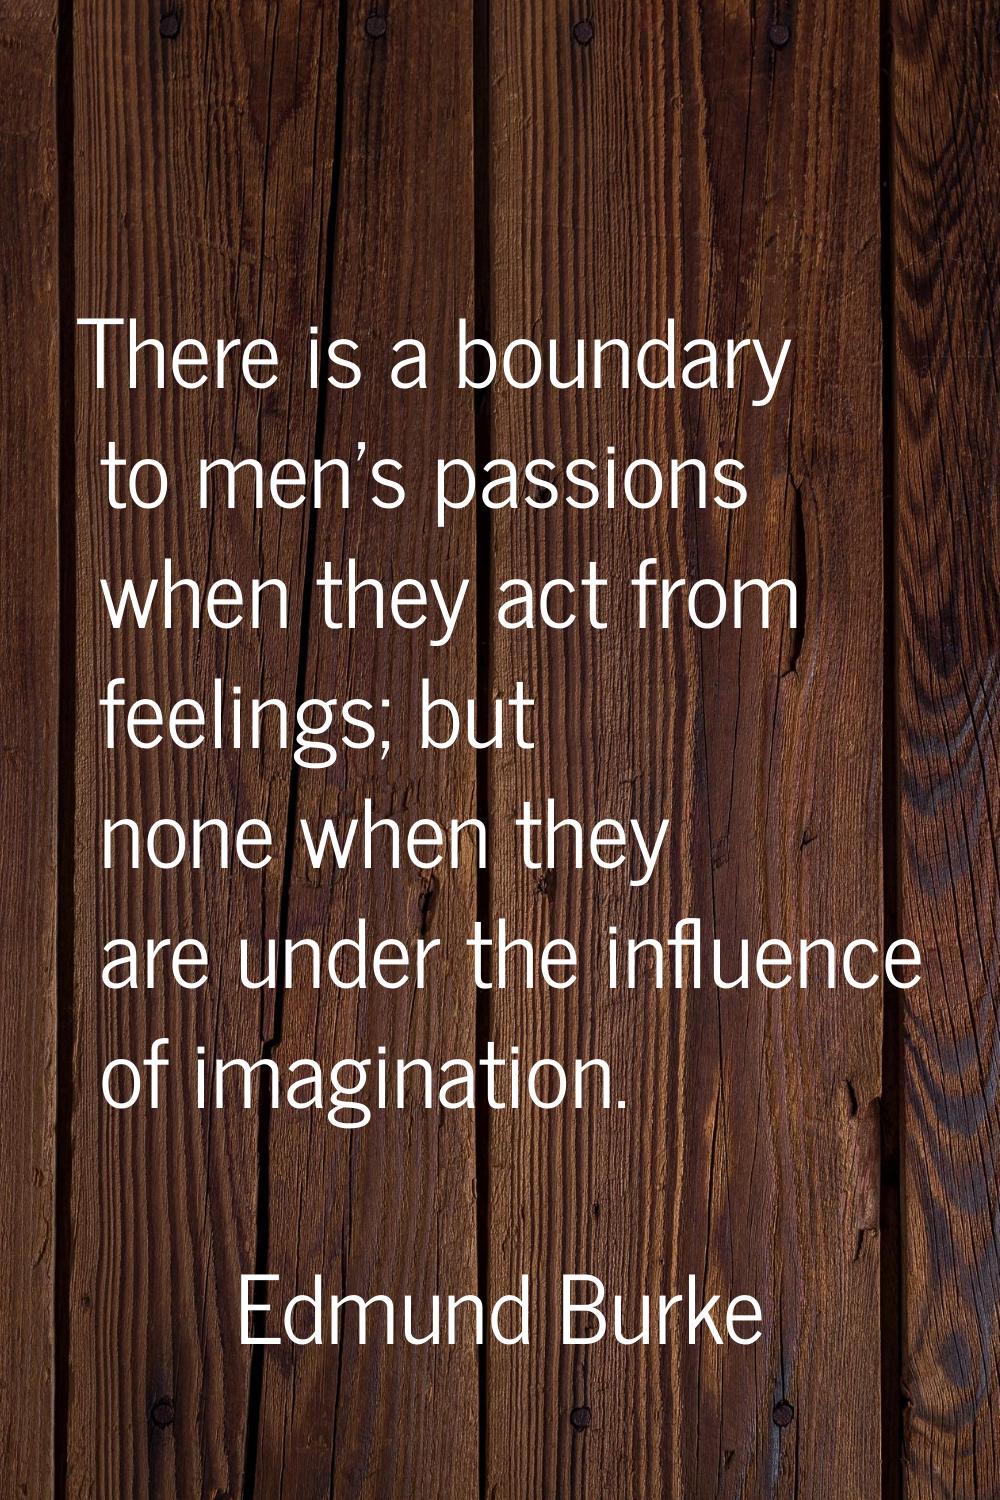 There is a boundary to men's passions when they act from feelings; but none when they are under the